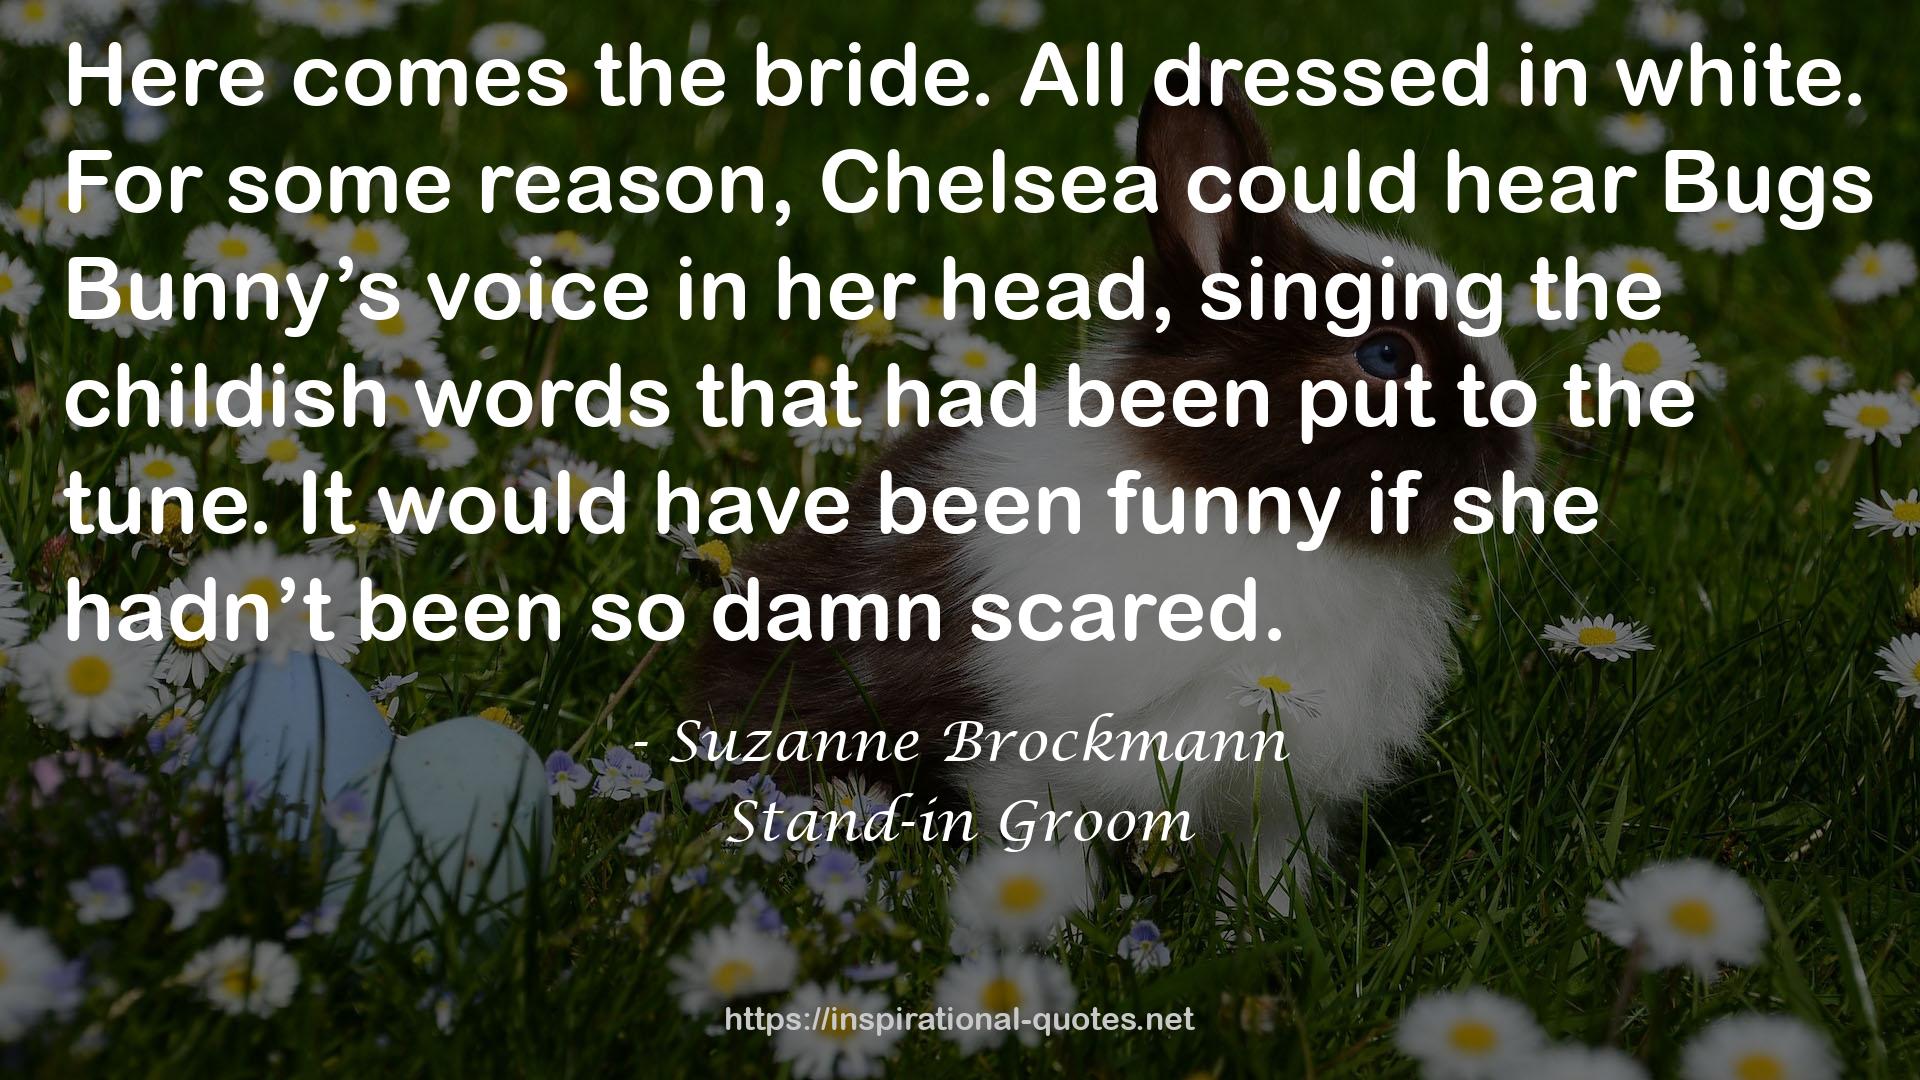 Stand-in Groom QUOTES